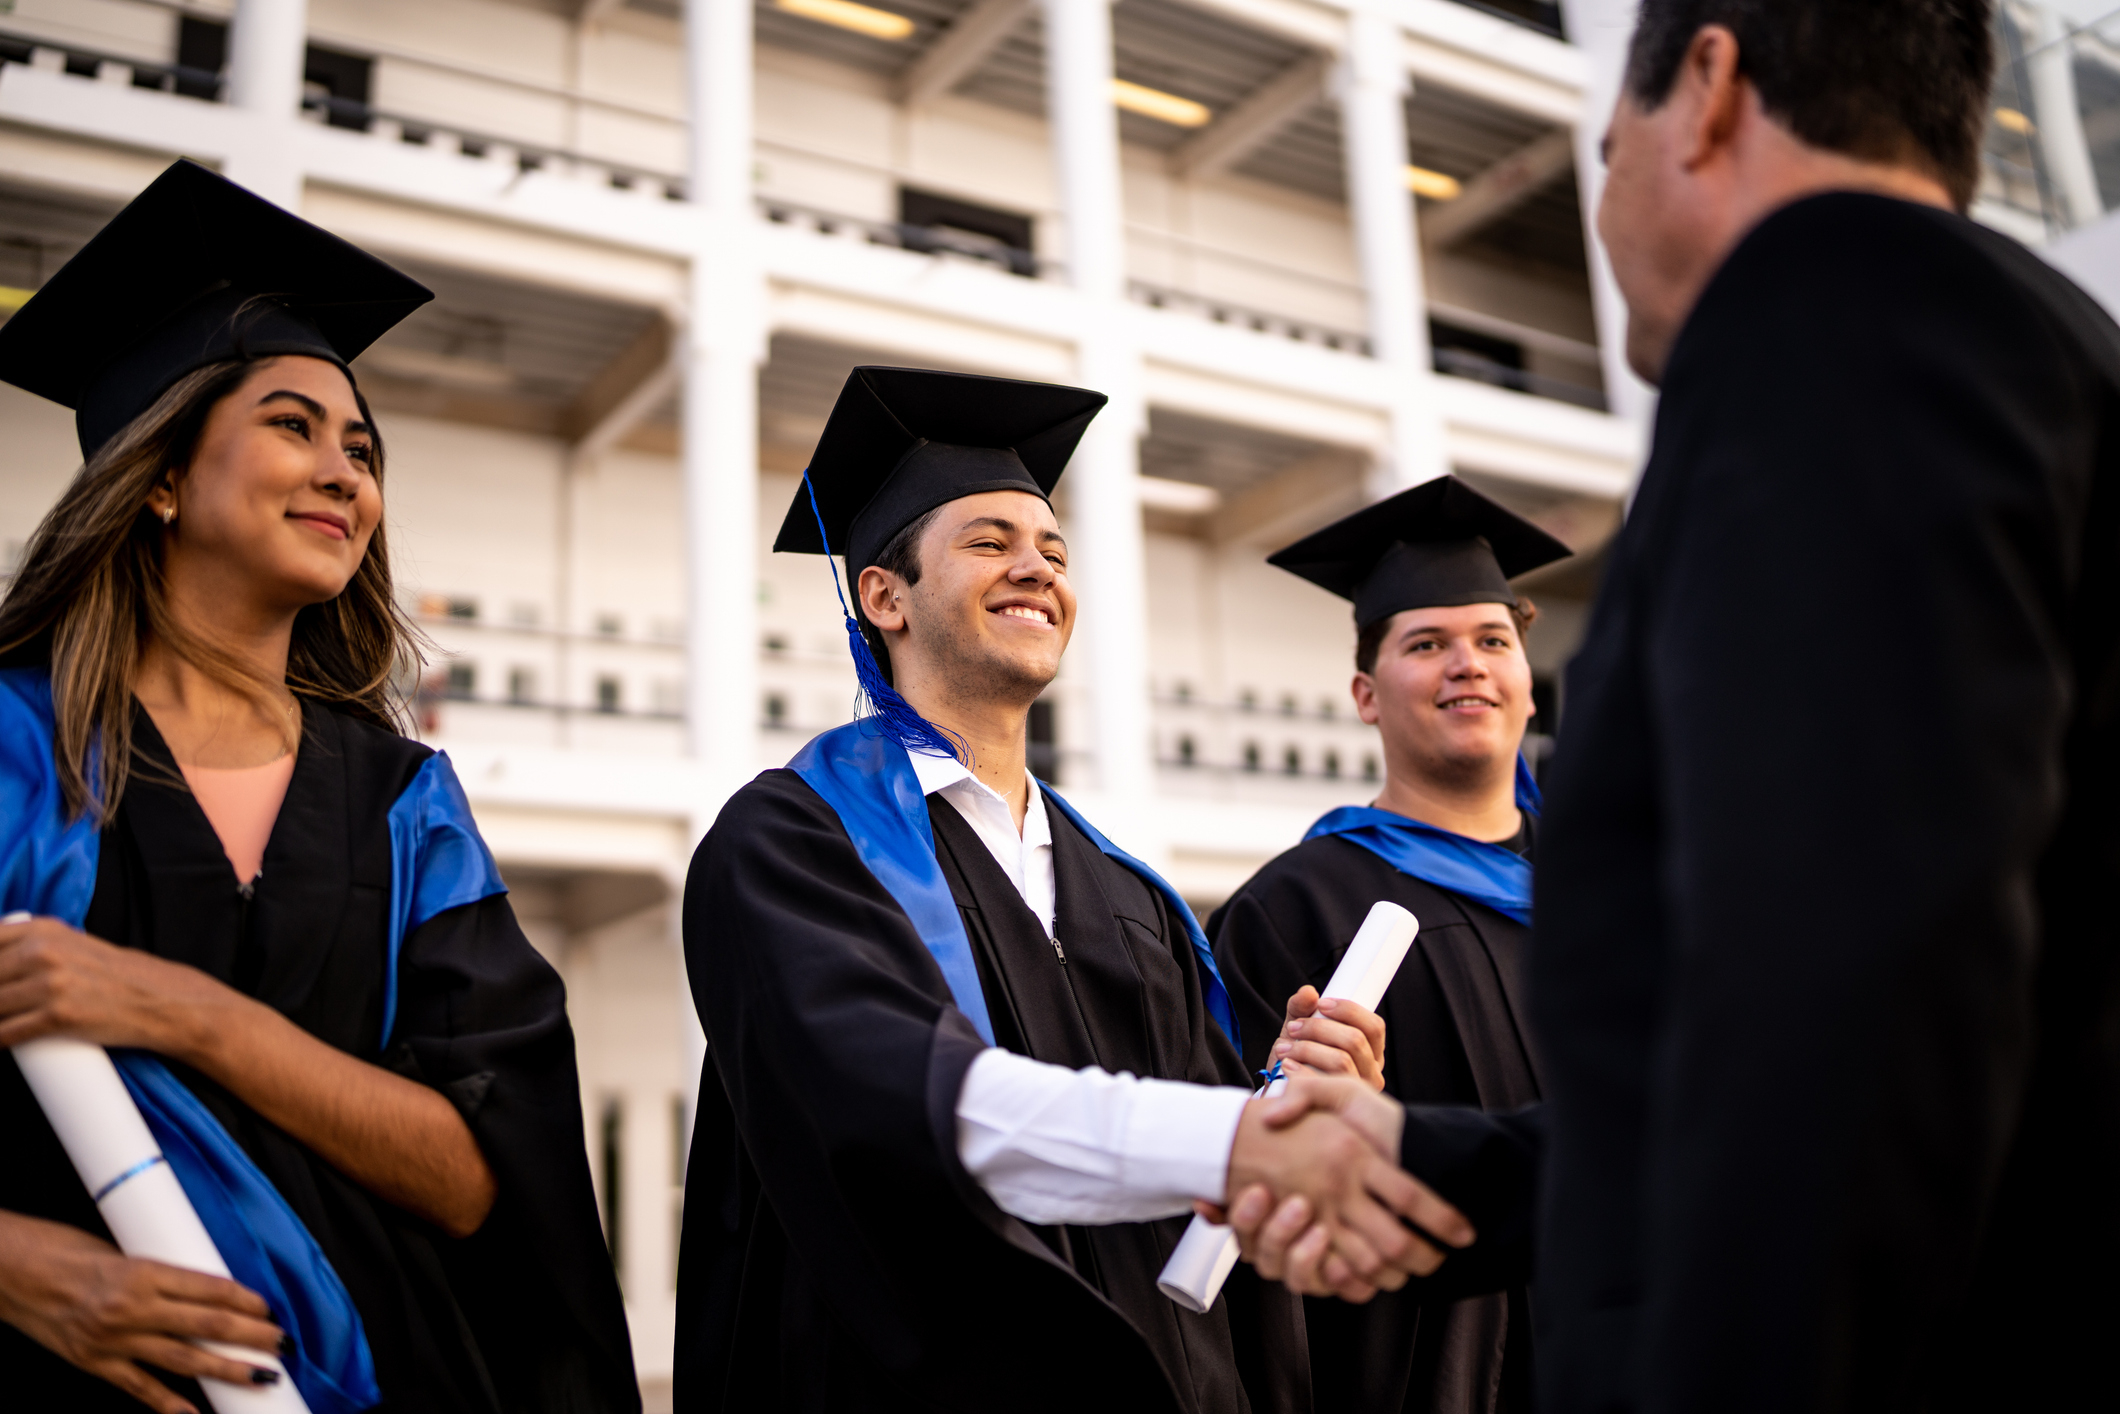 Graduates in cap and gown shaking hands with a faculty member at a graduation ceremony